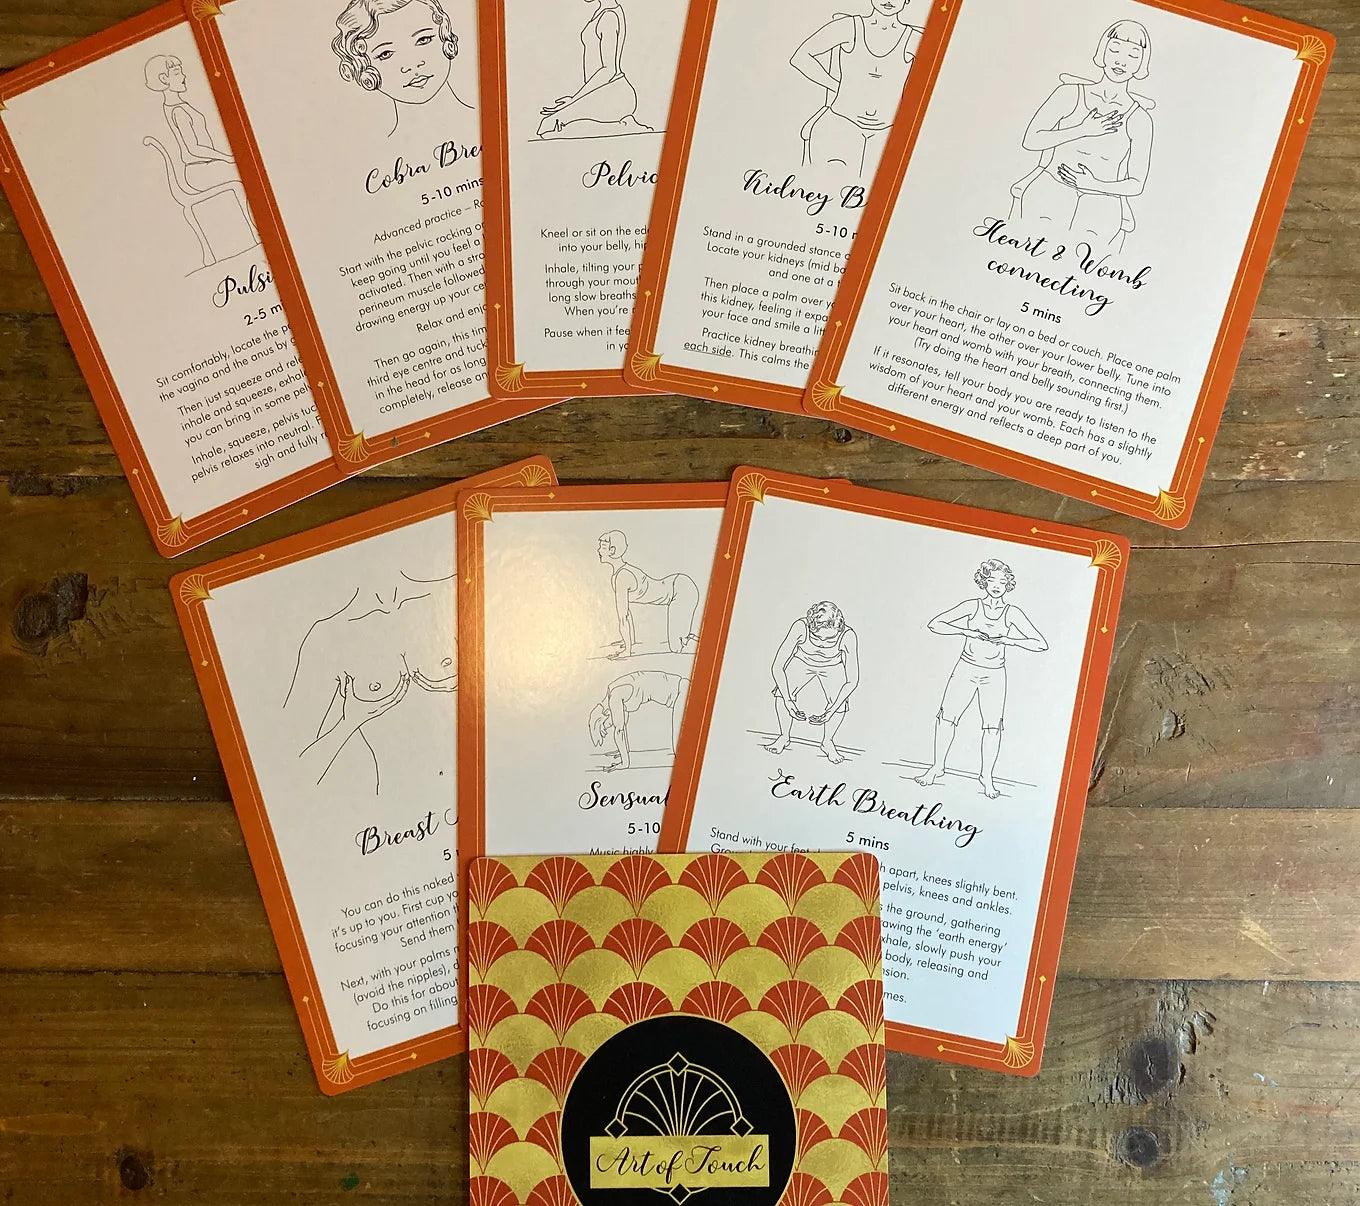 Art Of Touch Cards: Practices for Embodiment, Connection & Awakening - Passionfruit